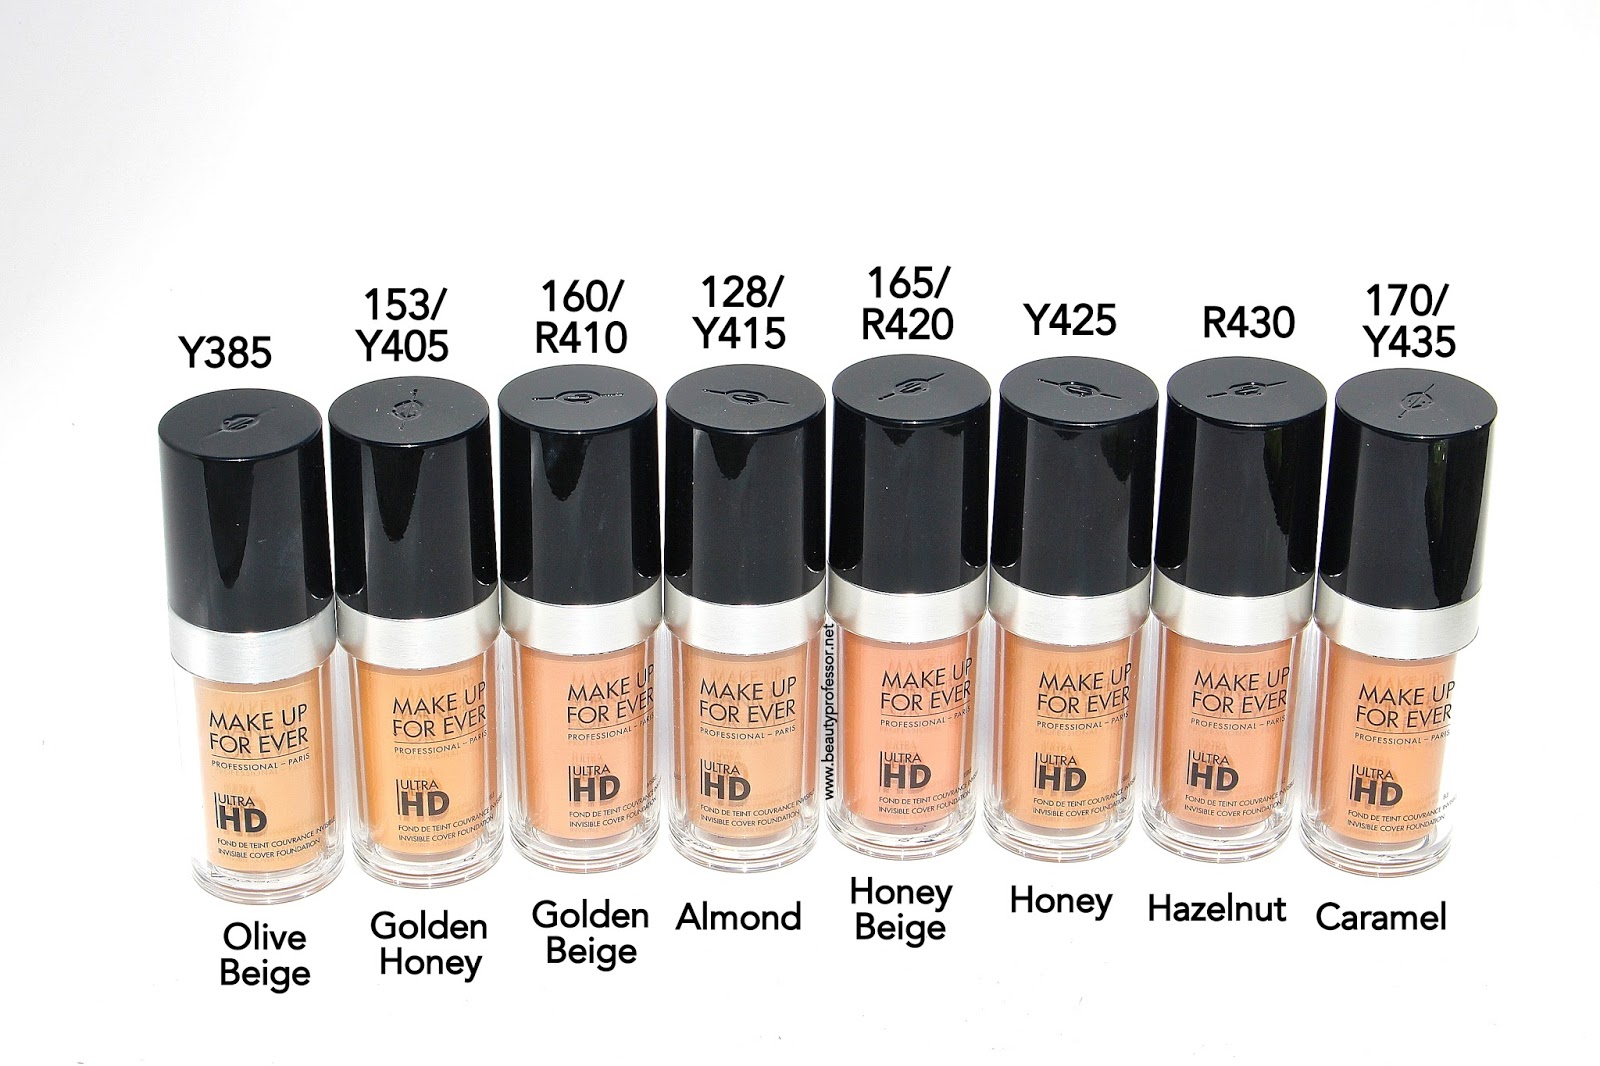  makeup forever ultra hd foundation y385 